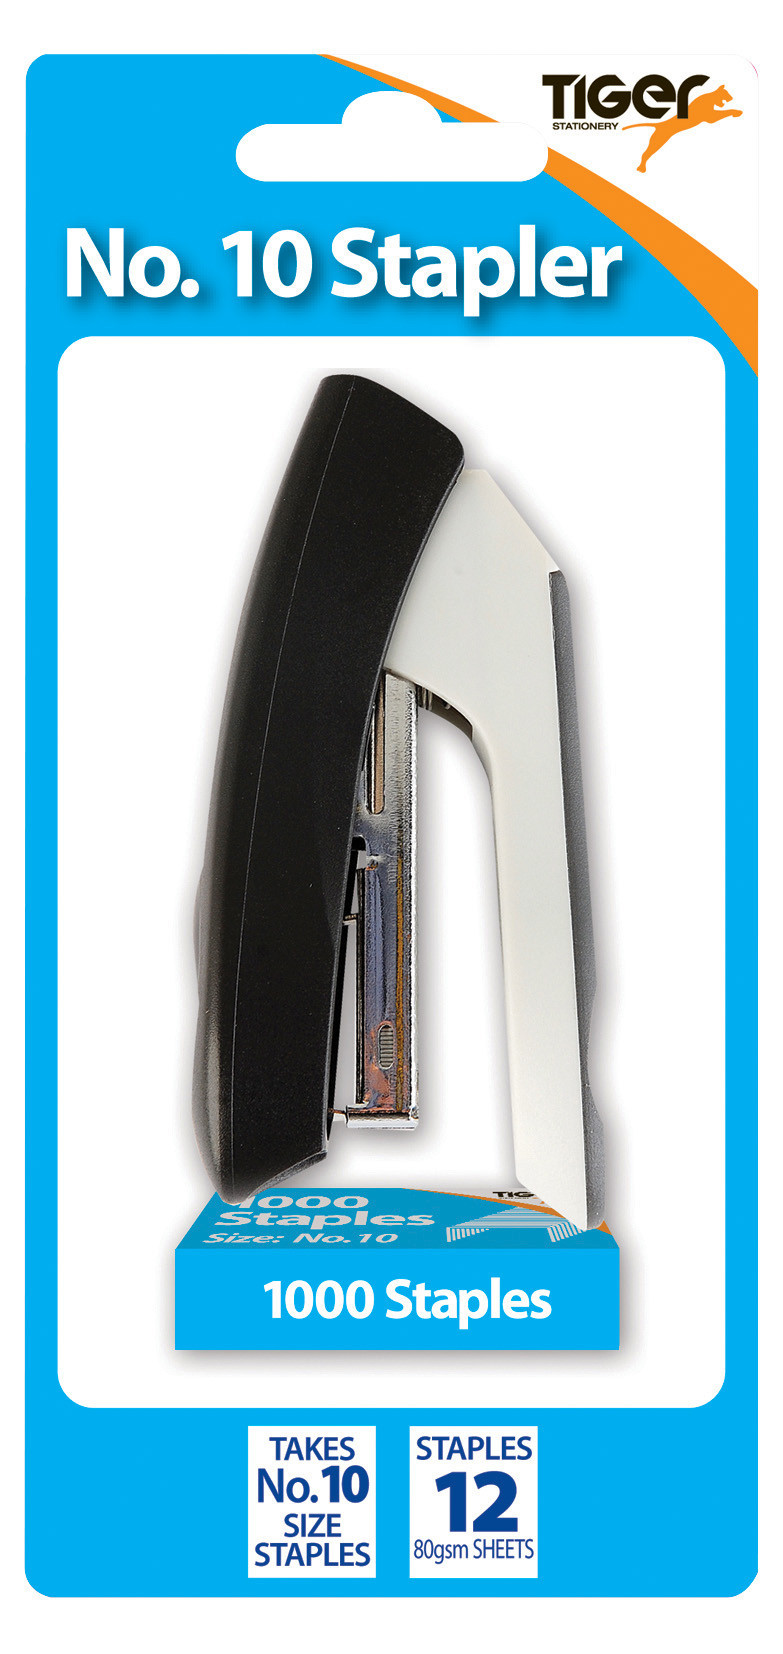 Stapler, Size No. 10 with 1000 staples, Carded